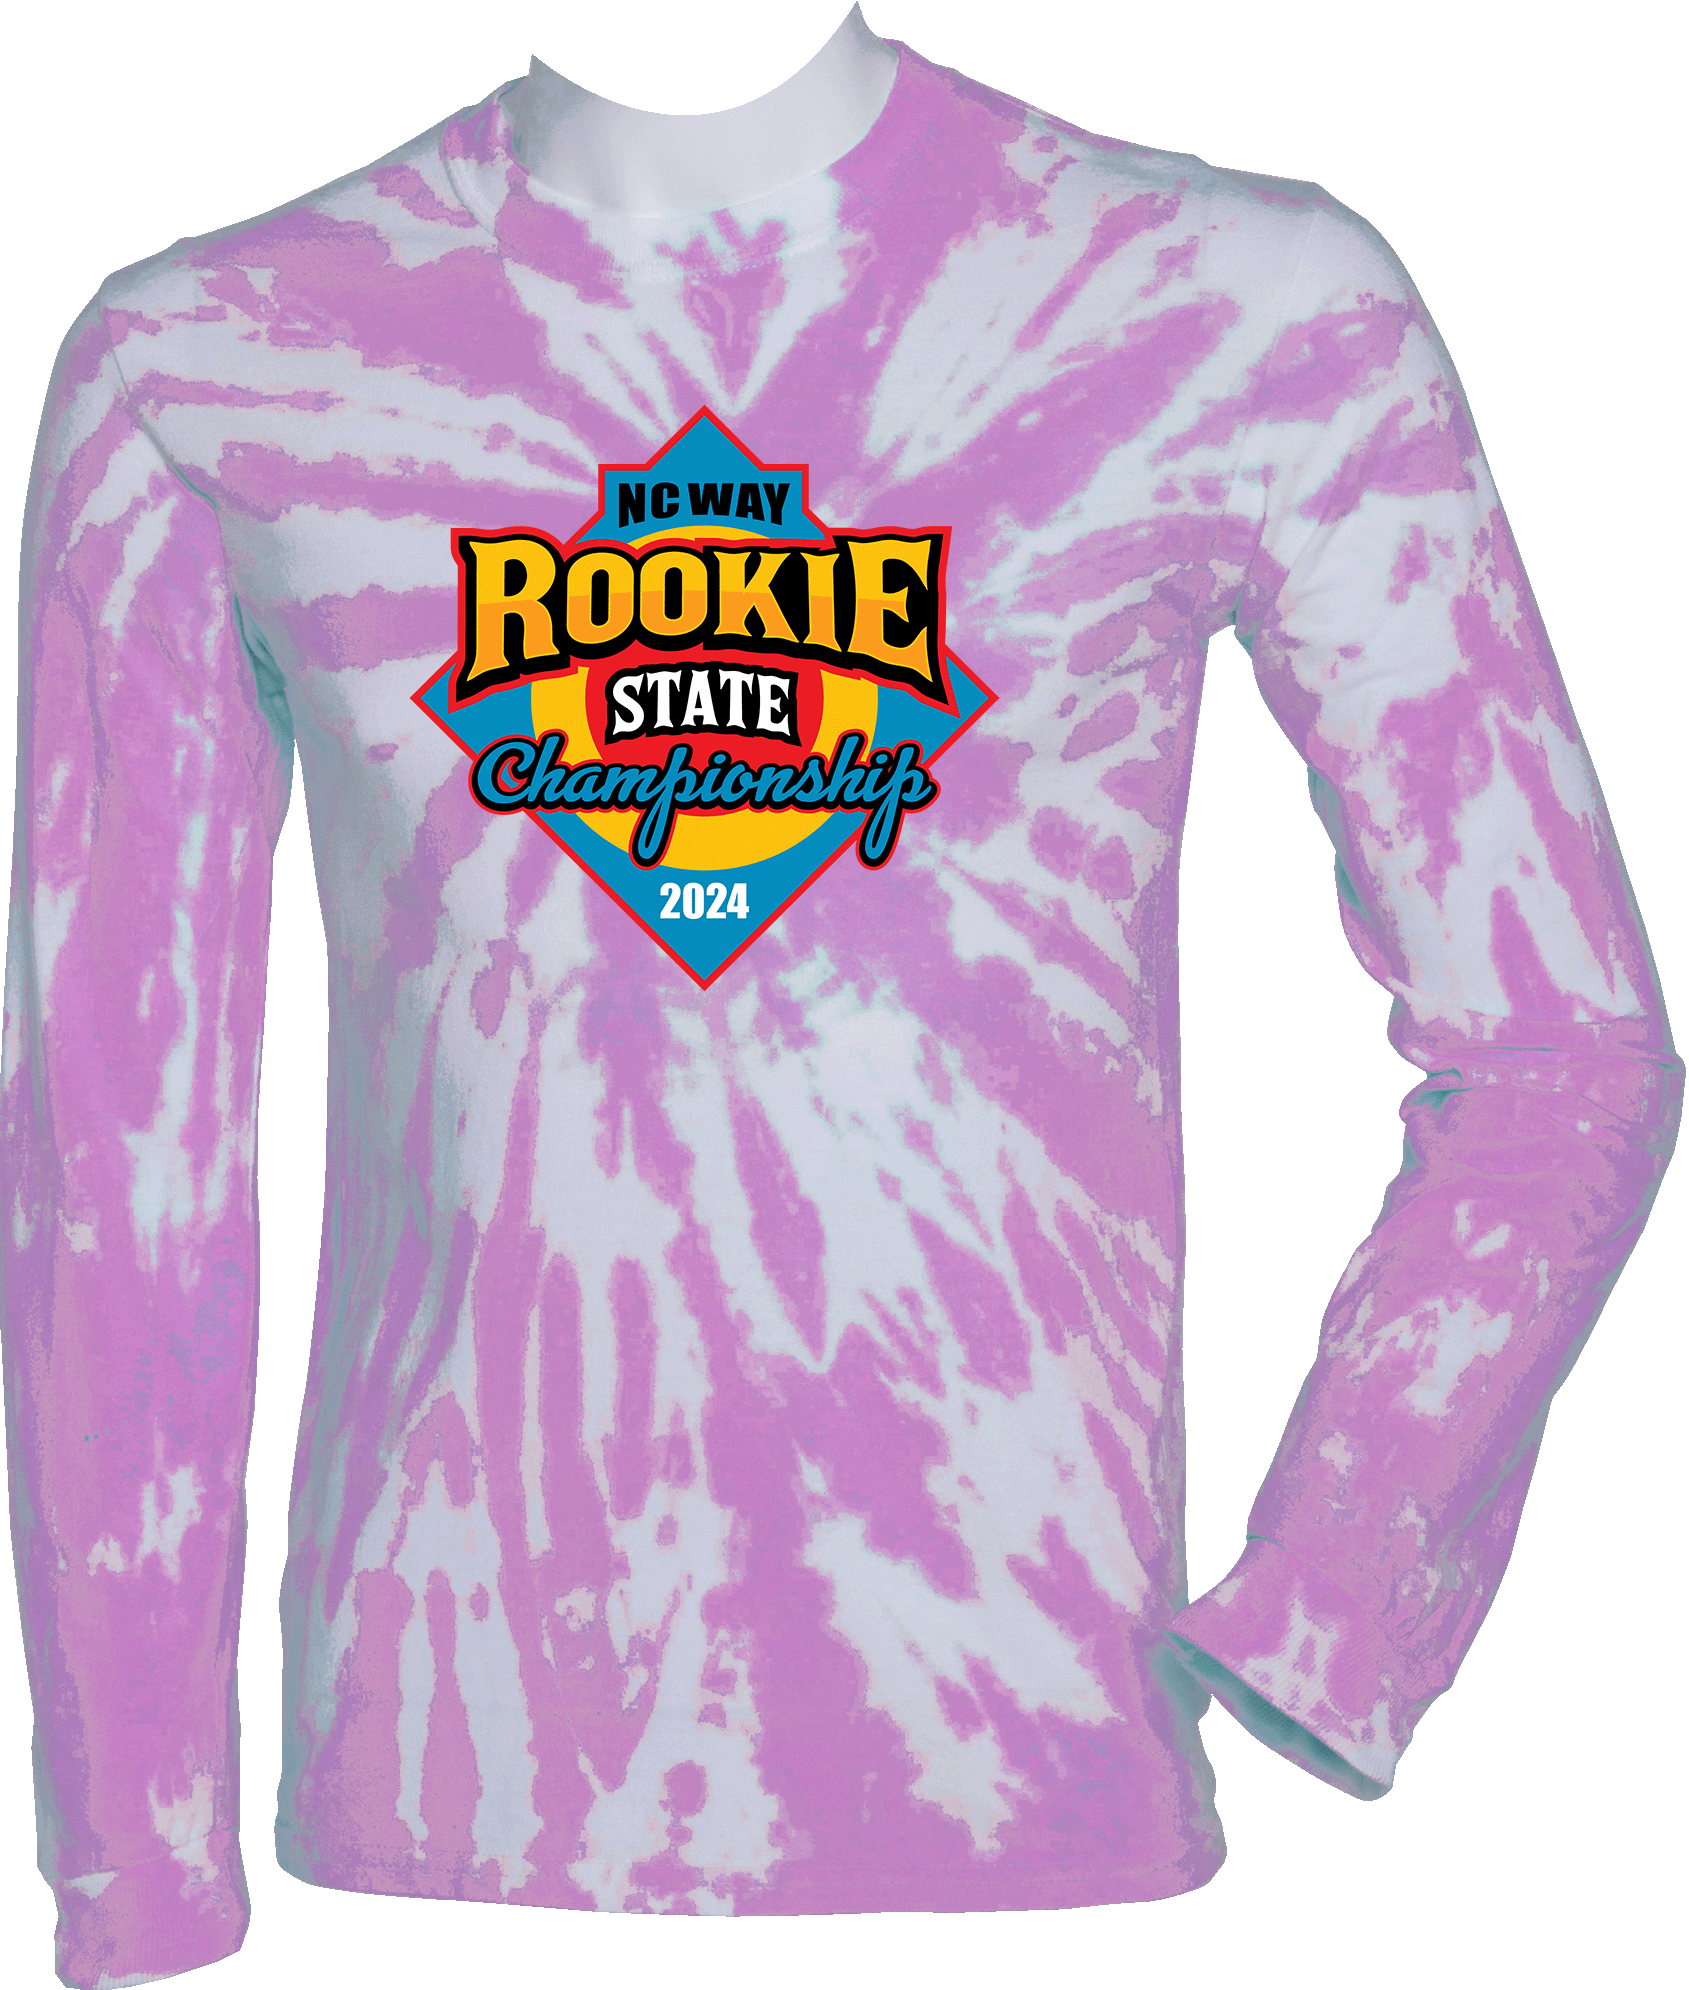 Tie-Dye Long Sleeves - 2024 NCWAY Rookie State Championship